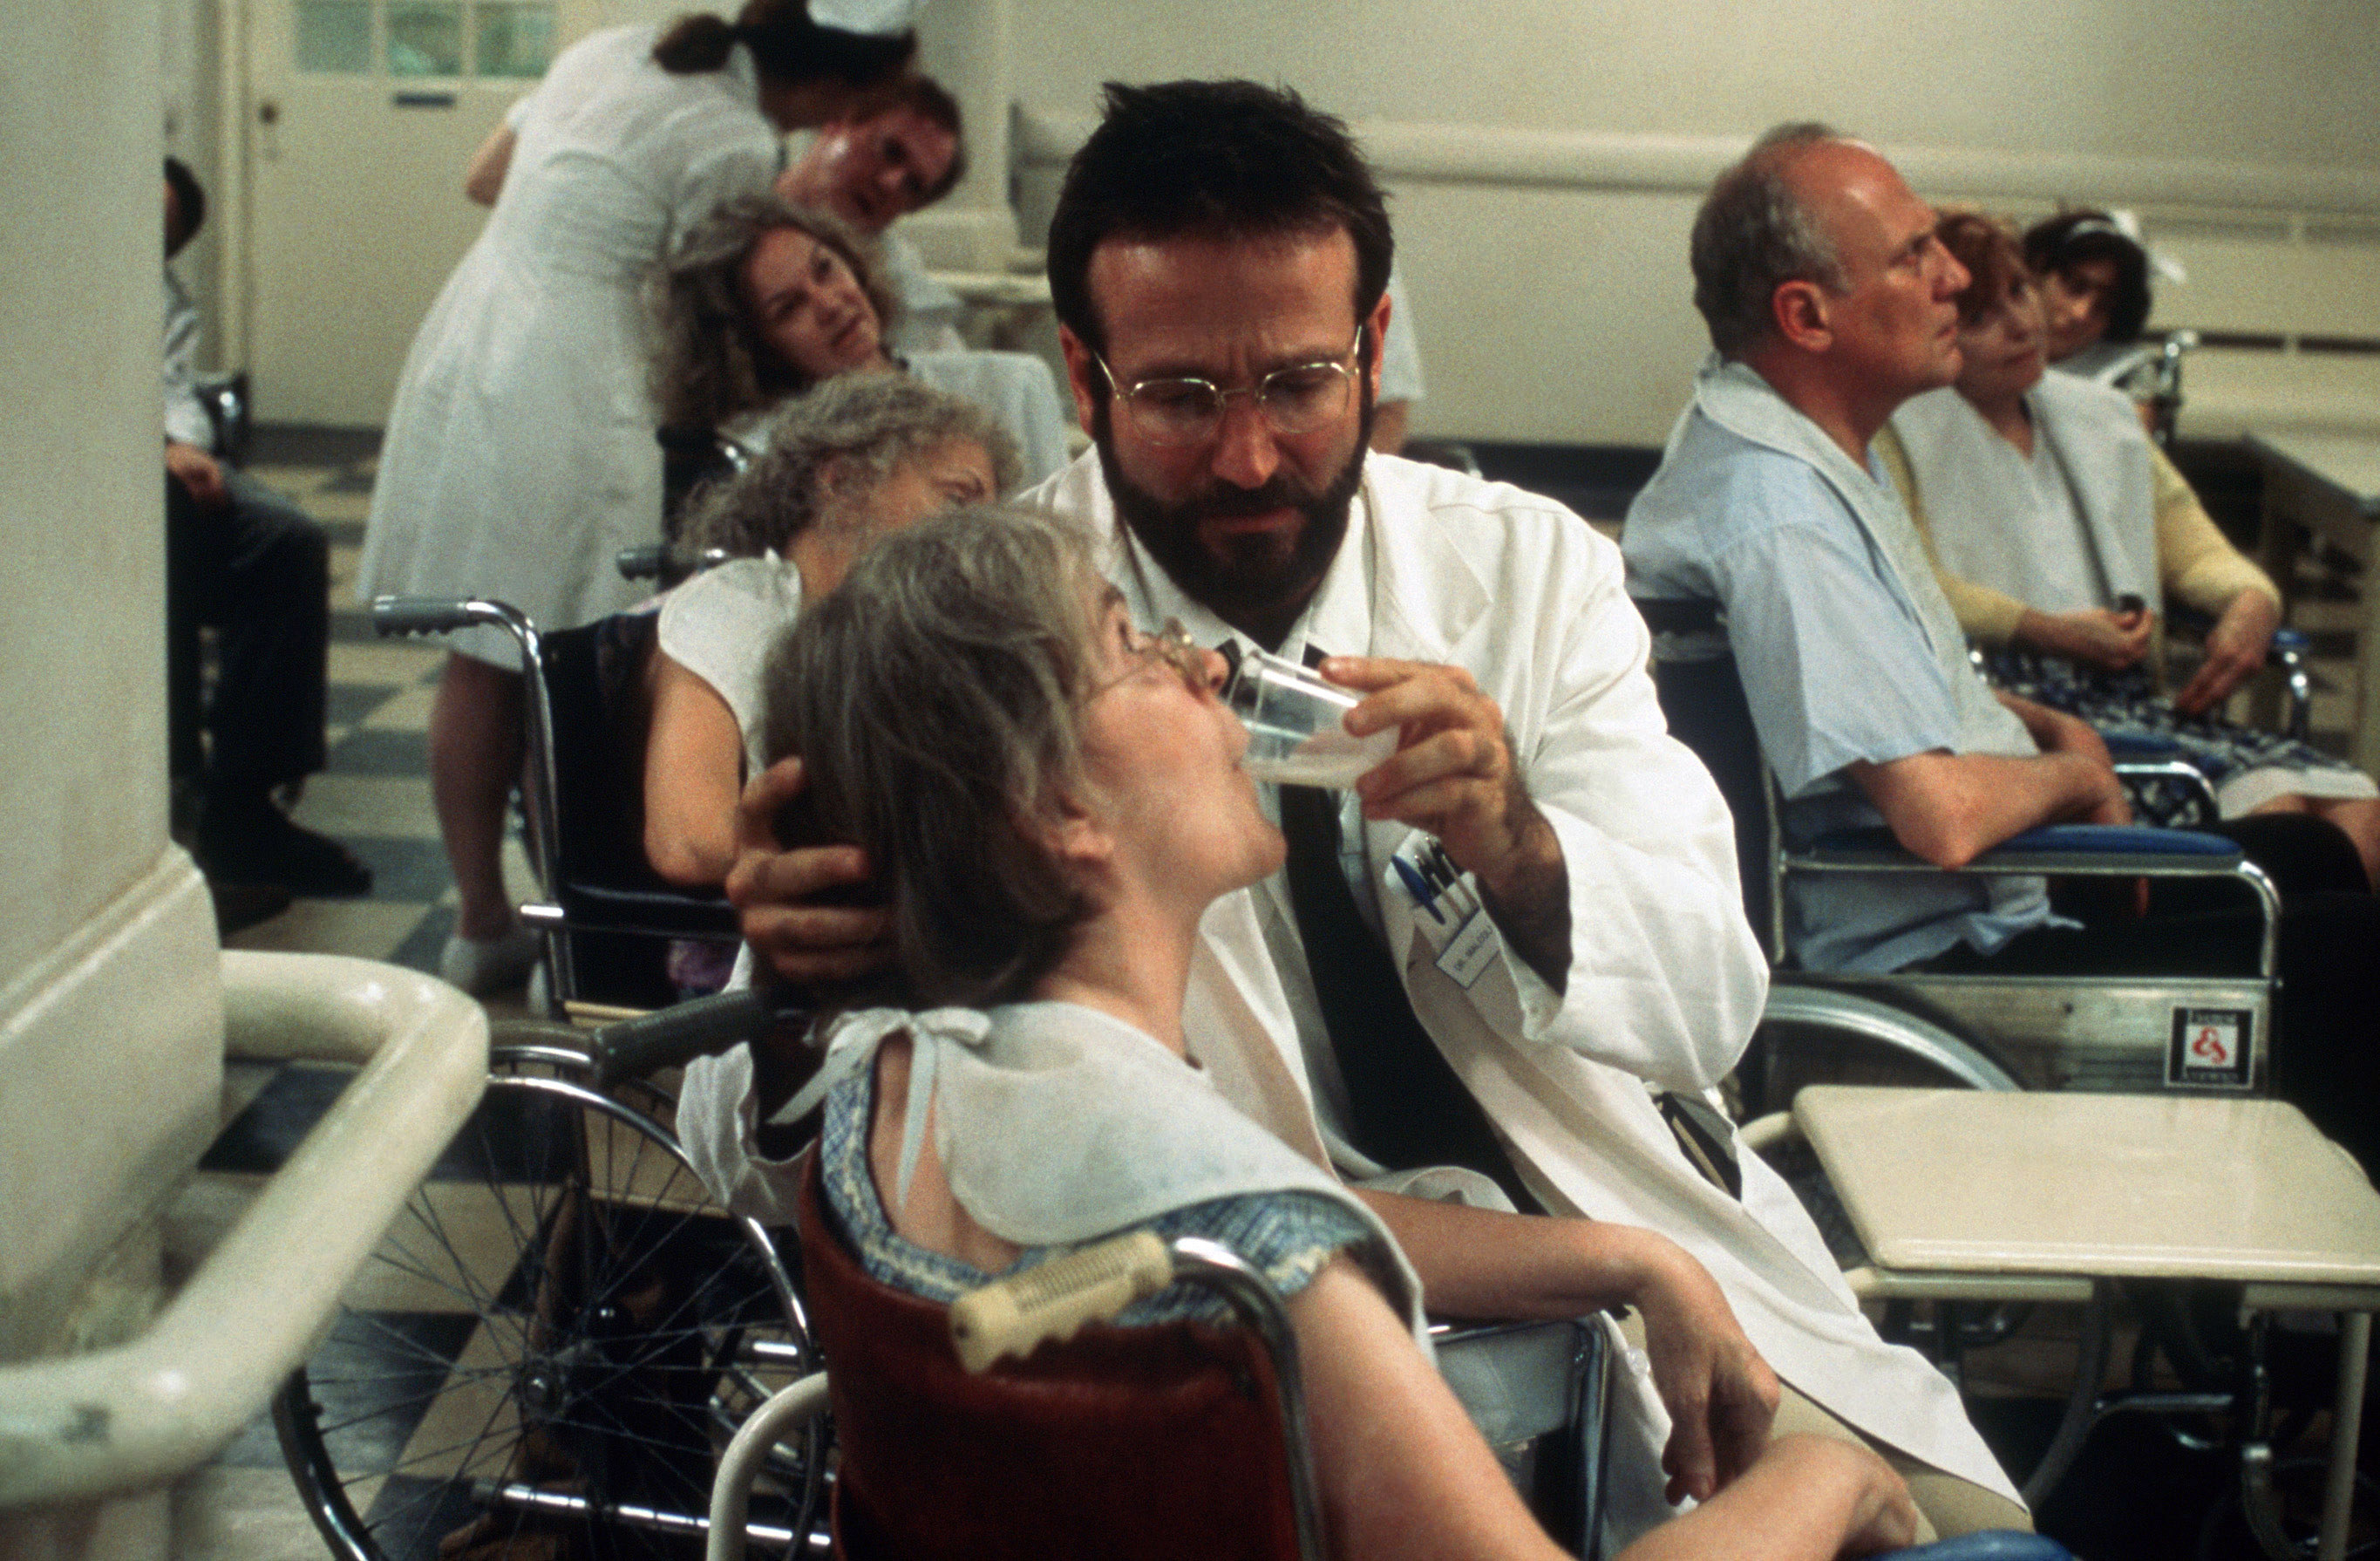 Robin helping a patient in a wheelchair in the movie